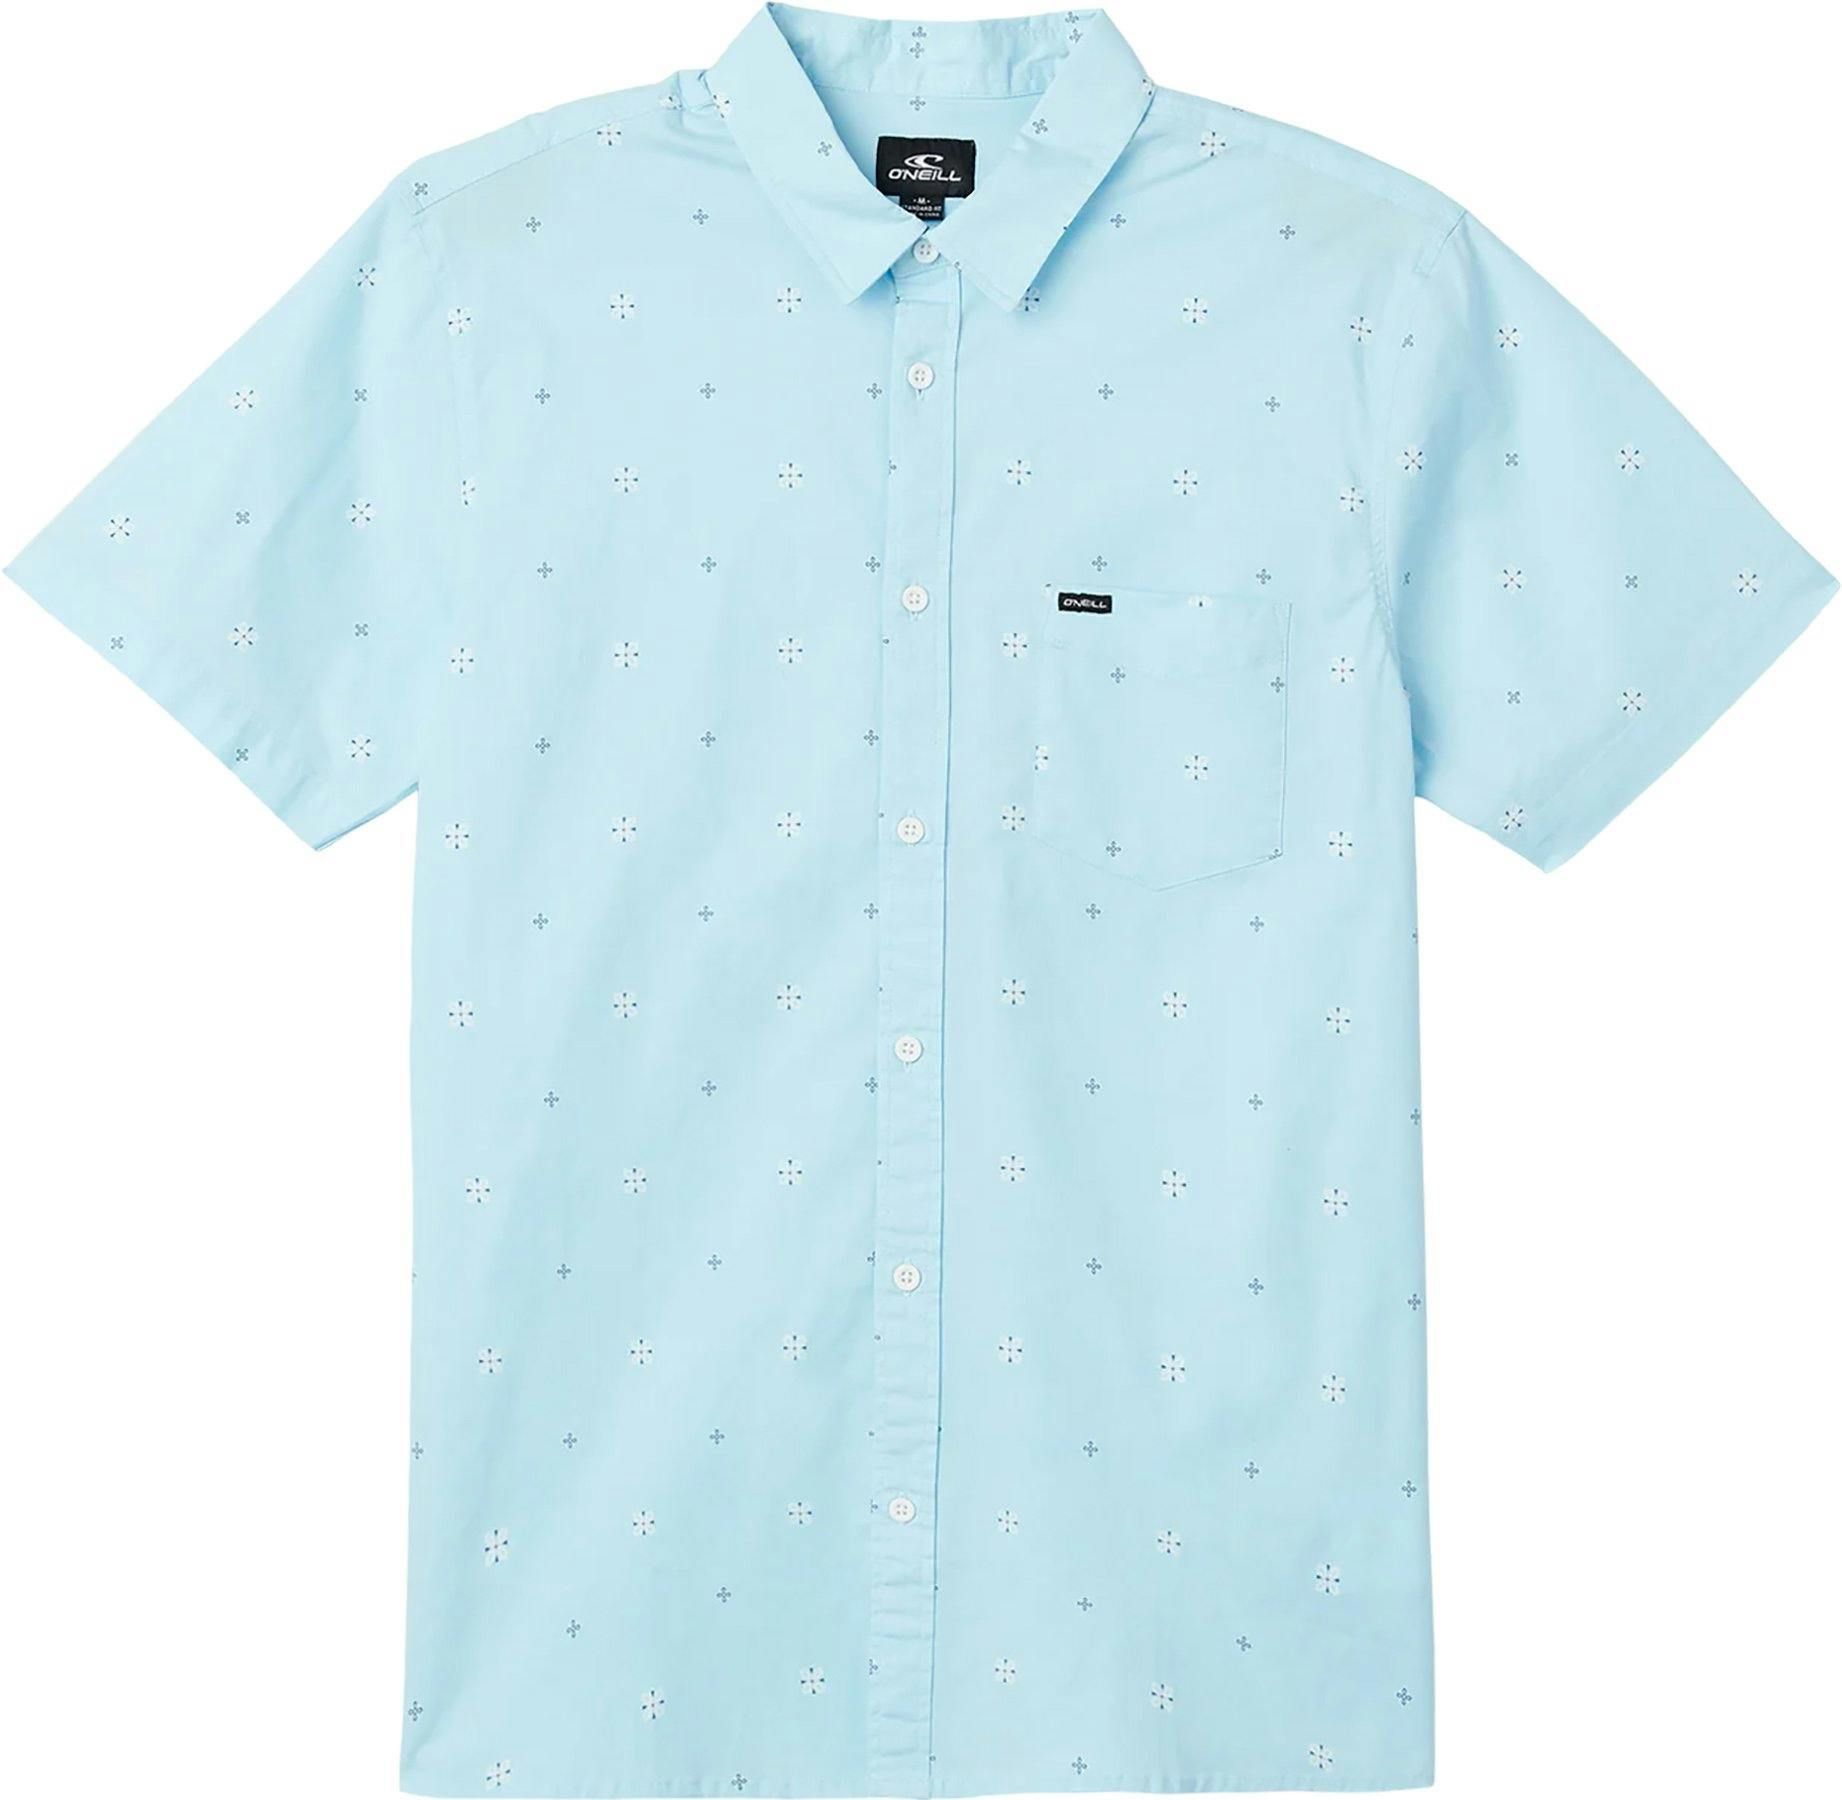 Product image for Quiver Stretch Modern Fit Shirt - Men's